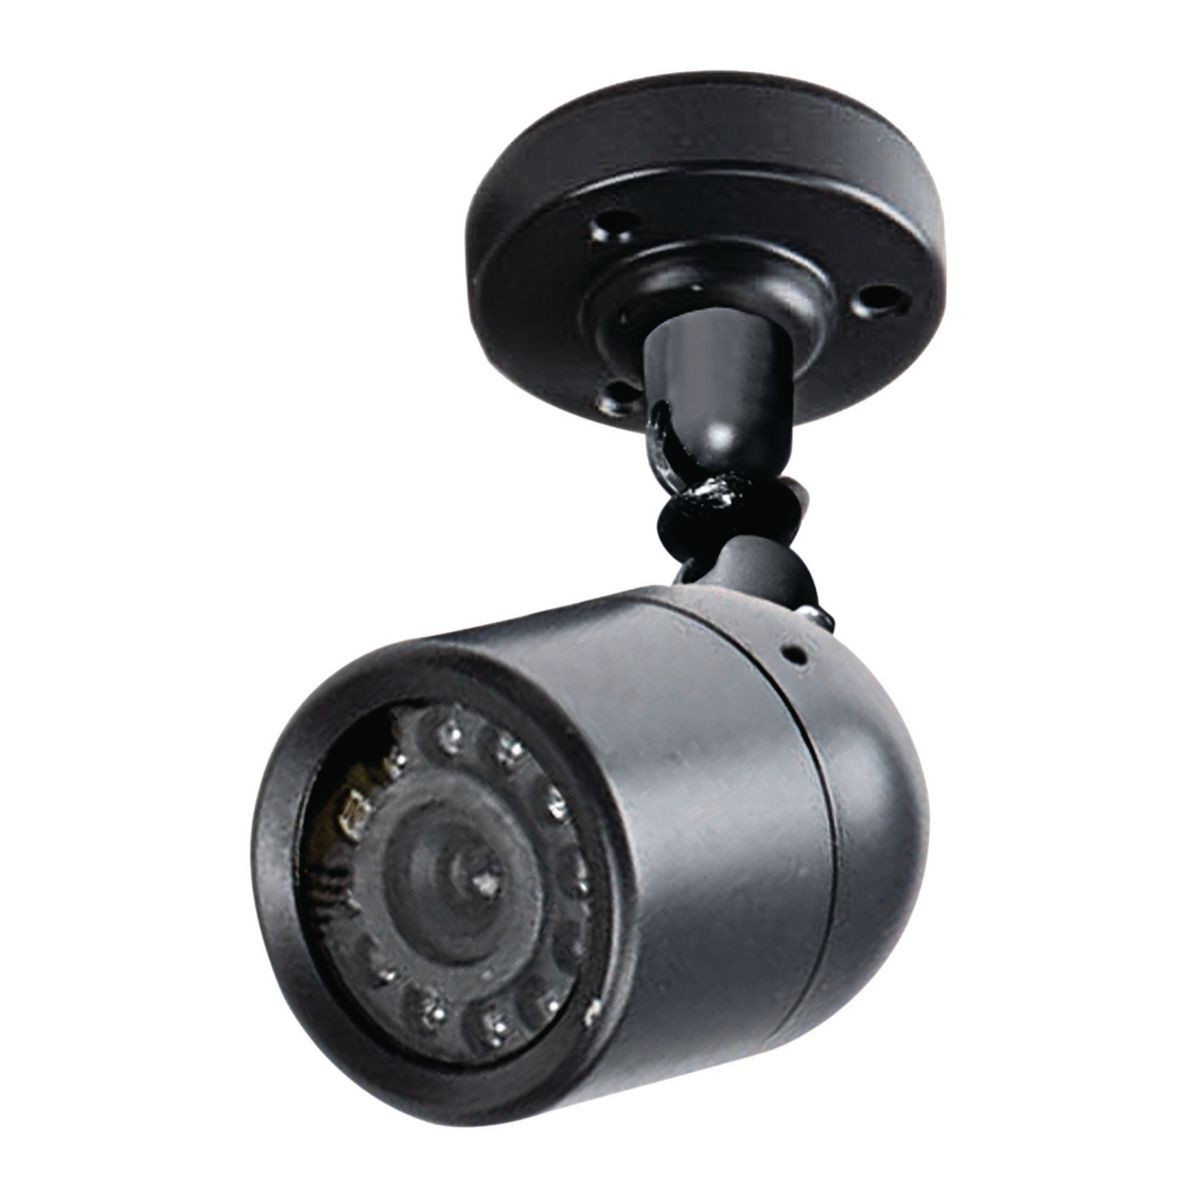 bunker hill wireless security camera system